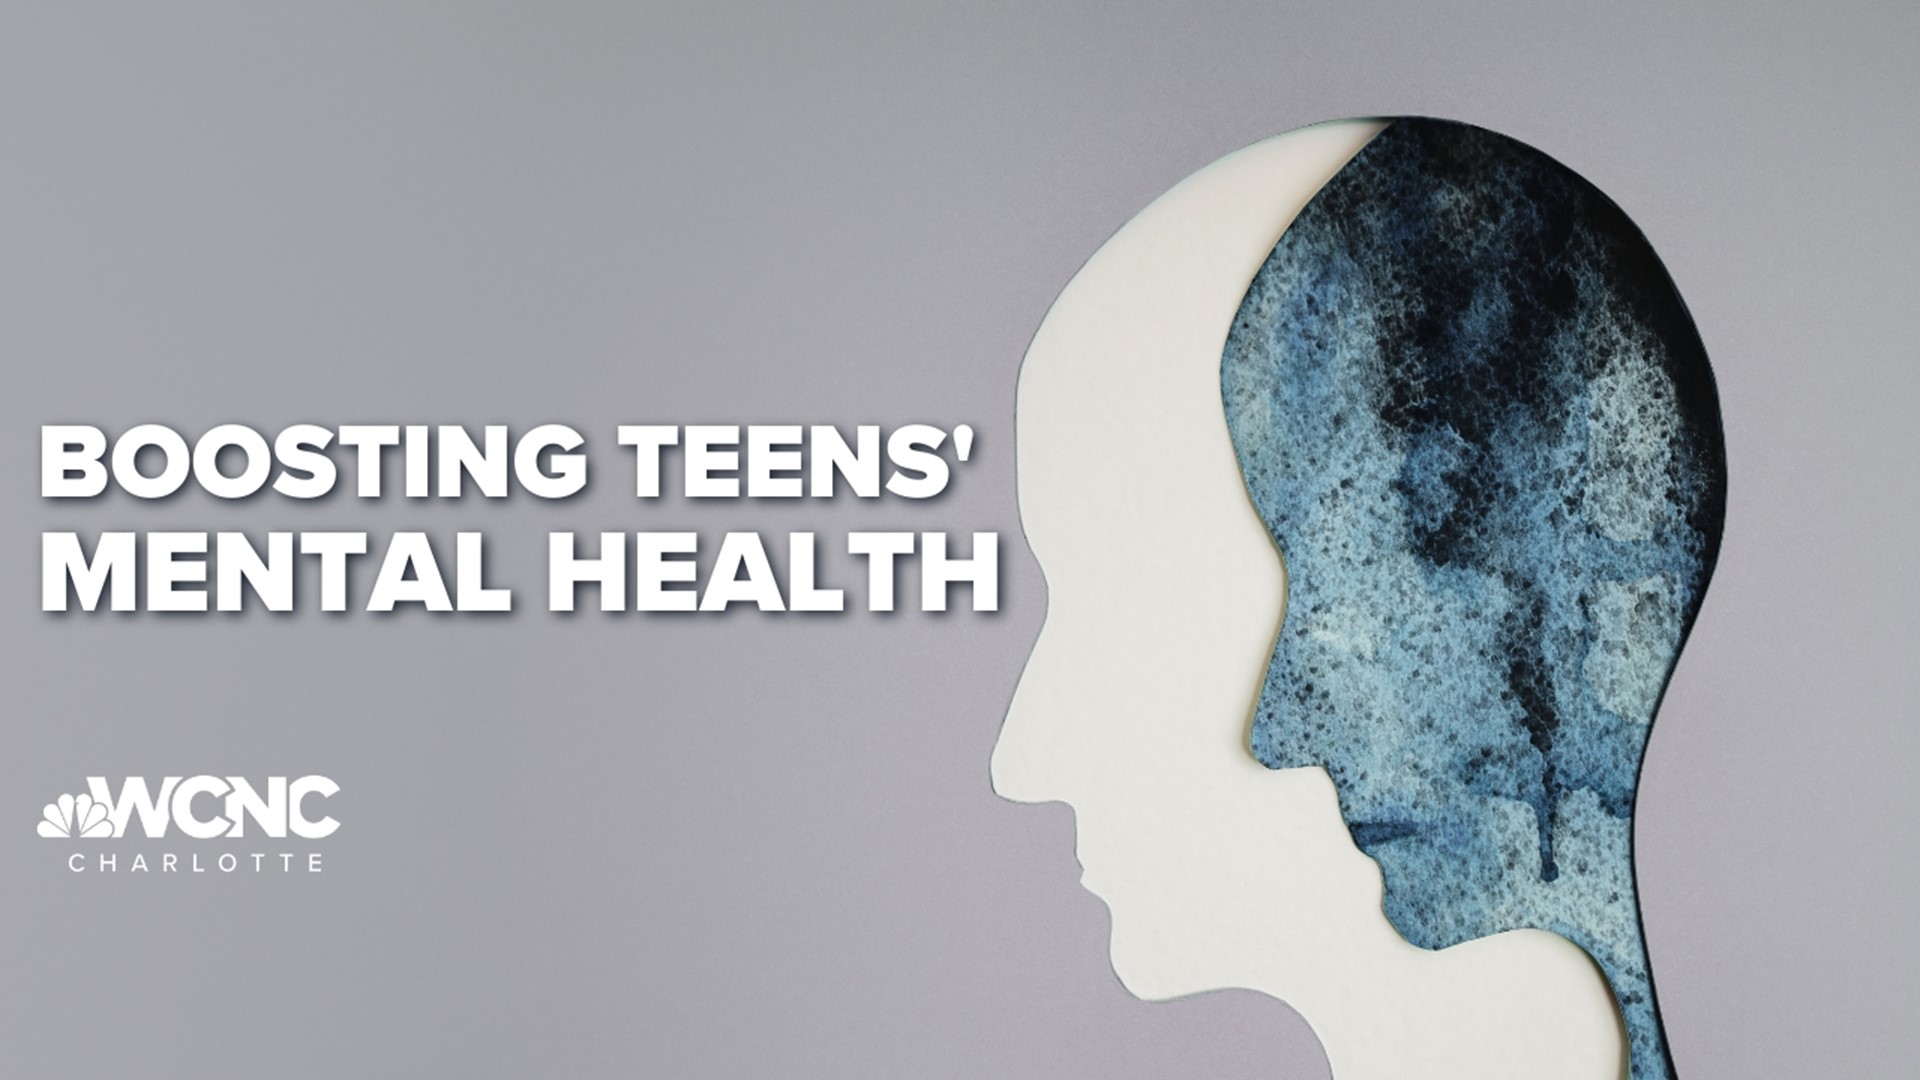 A new CDC report details startling trends related to high school students. More young people are experiencing a level of distress that requires action.